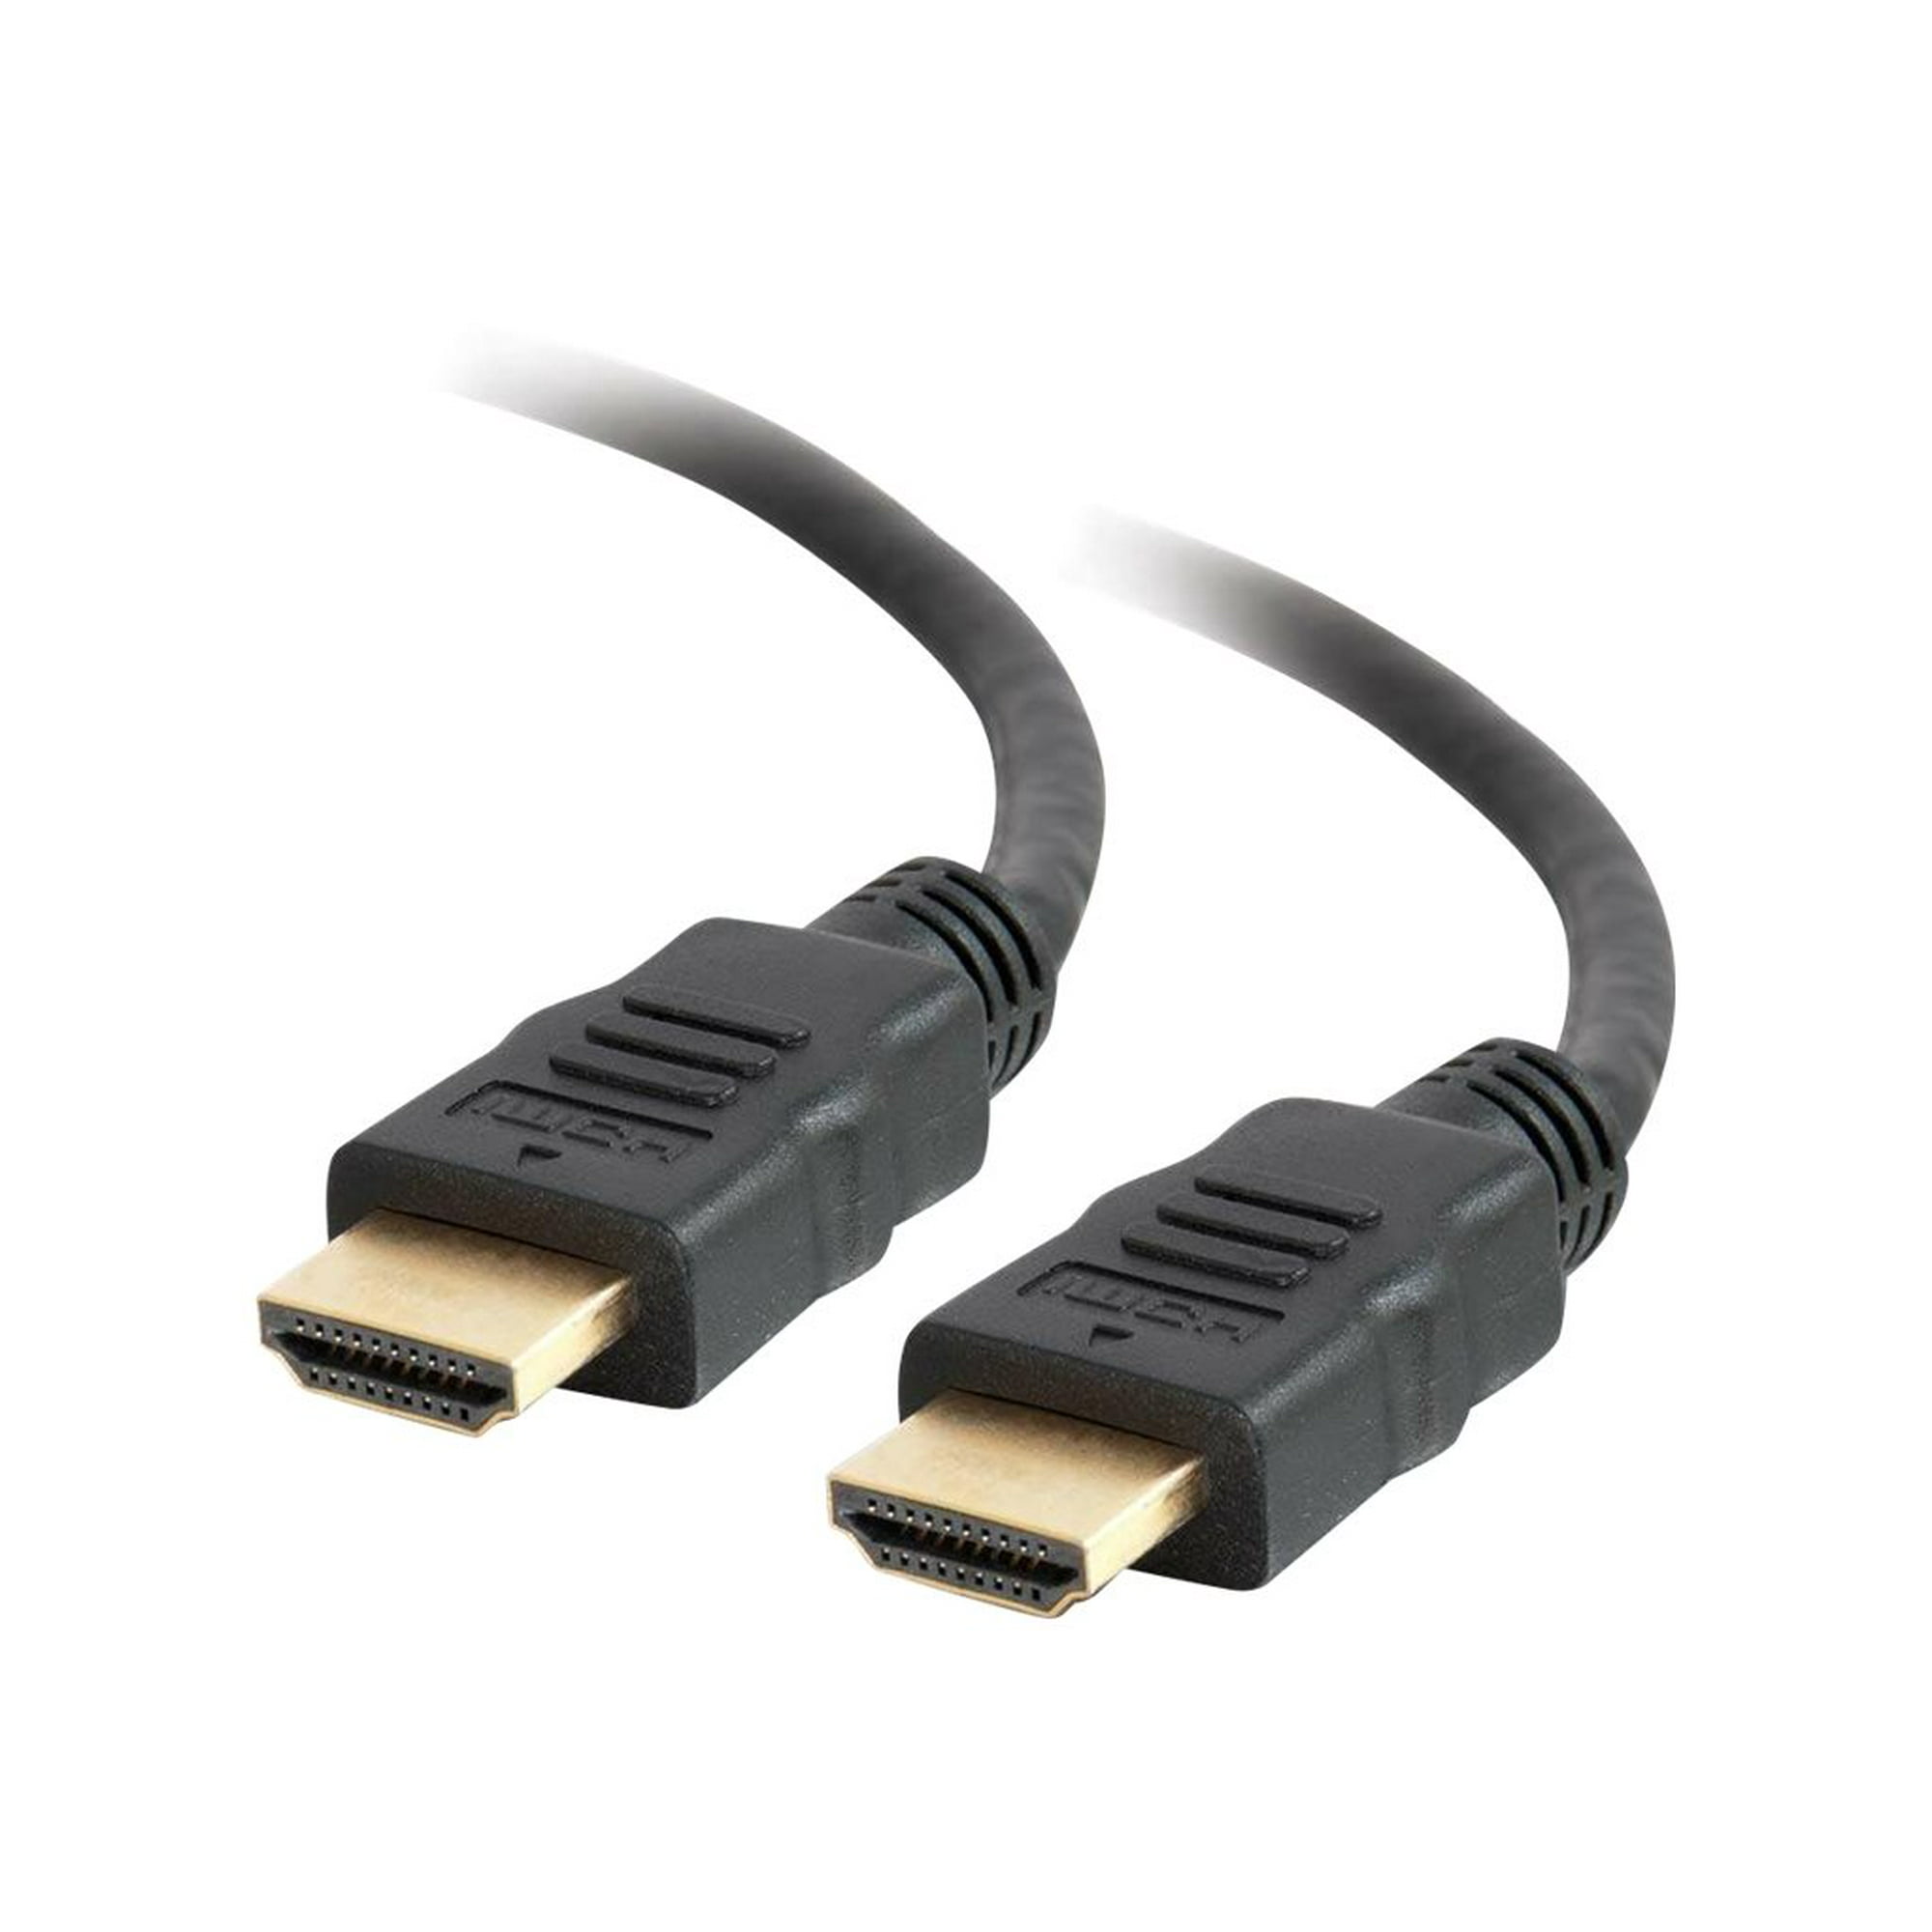 C2G 8ft 4K HDMI Cable with Ethernet - High Speed HDMI Cable -M/M - HDMI cable with Ethernet - HDMI male to HDMI male 8 ft - shielded - black | Walmart Canada